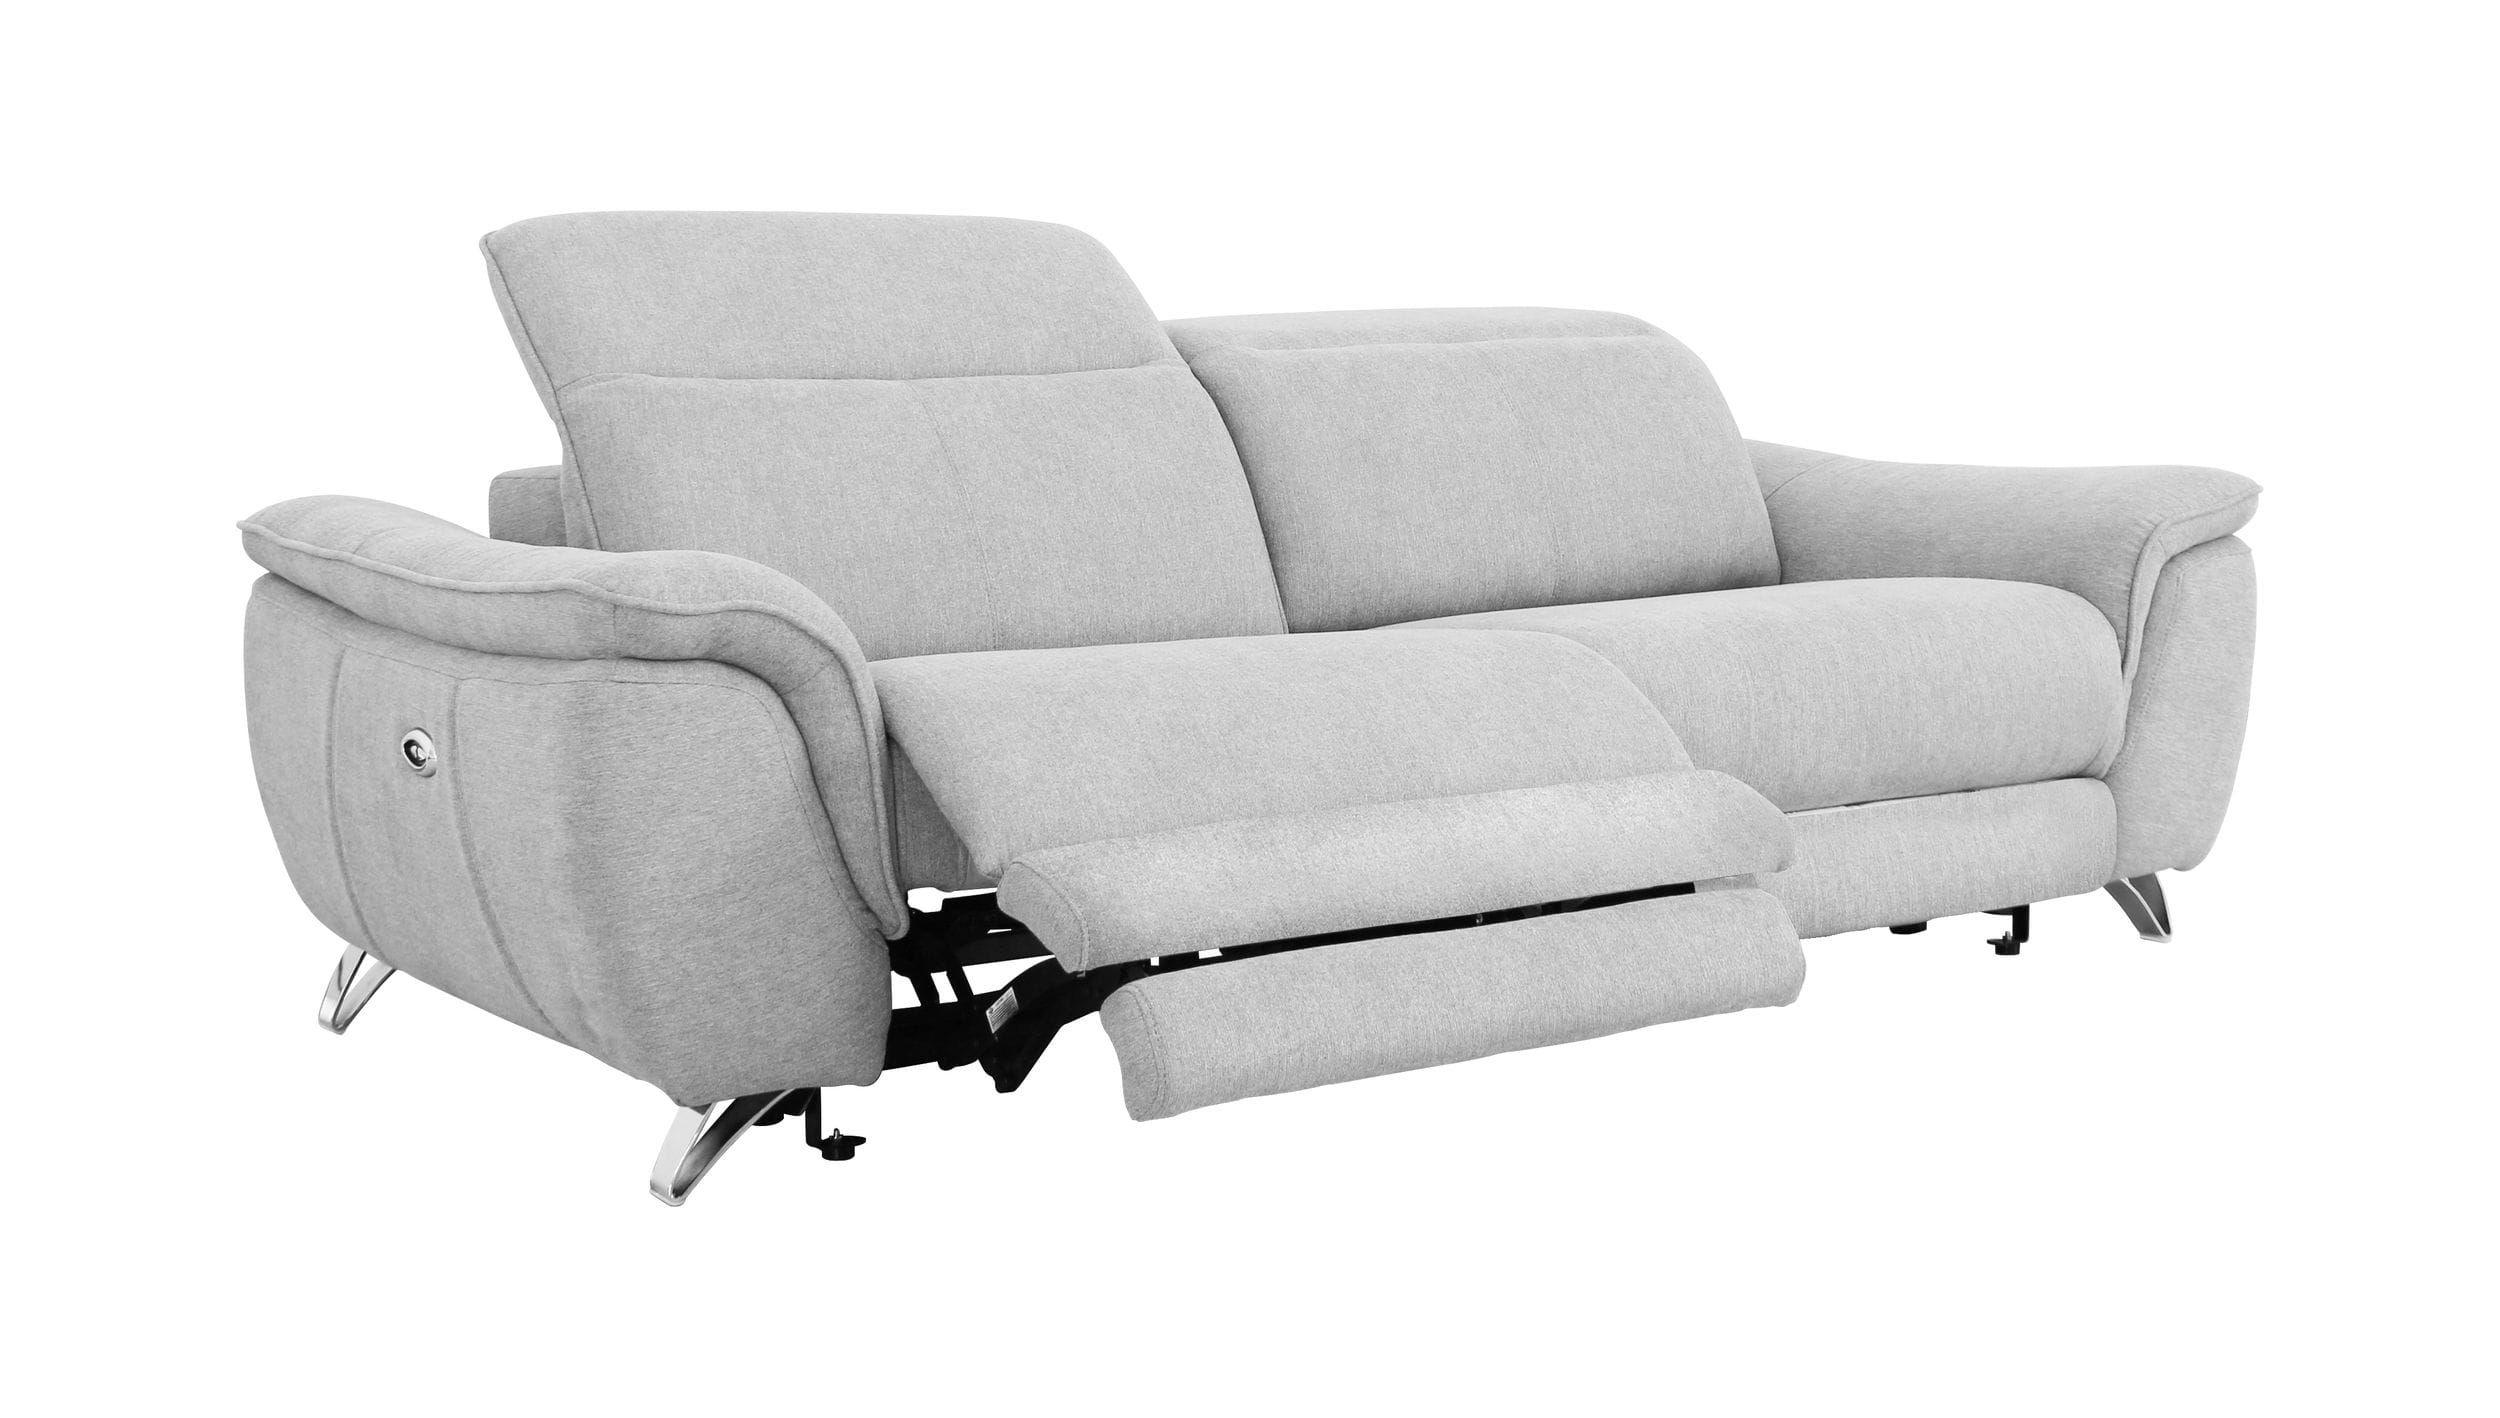 Contemporary, Modern Recliner Loveseat VGKNE9156-GRY-3S VGKNE9156-GRY-3S in Gray Fabric